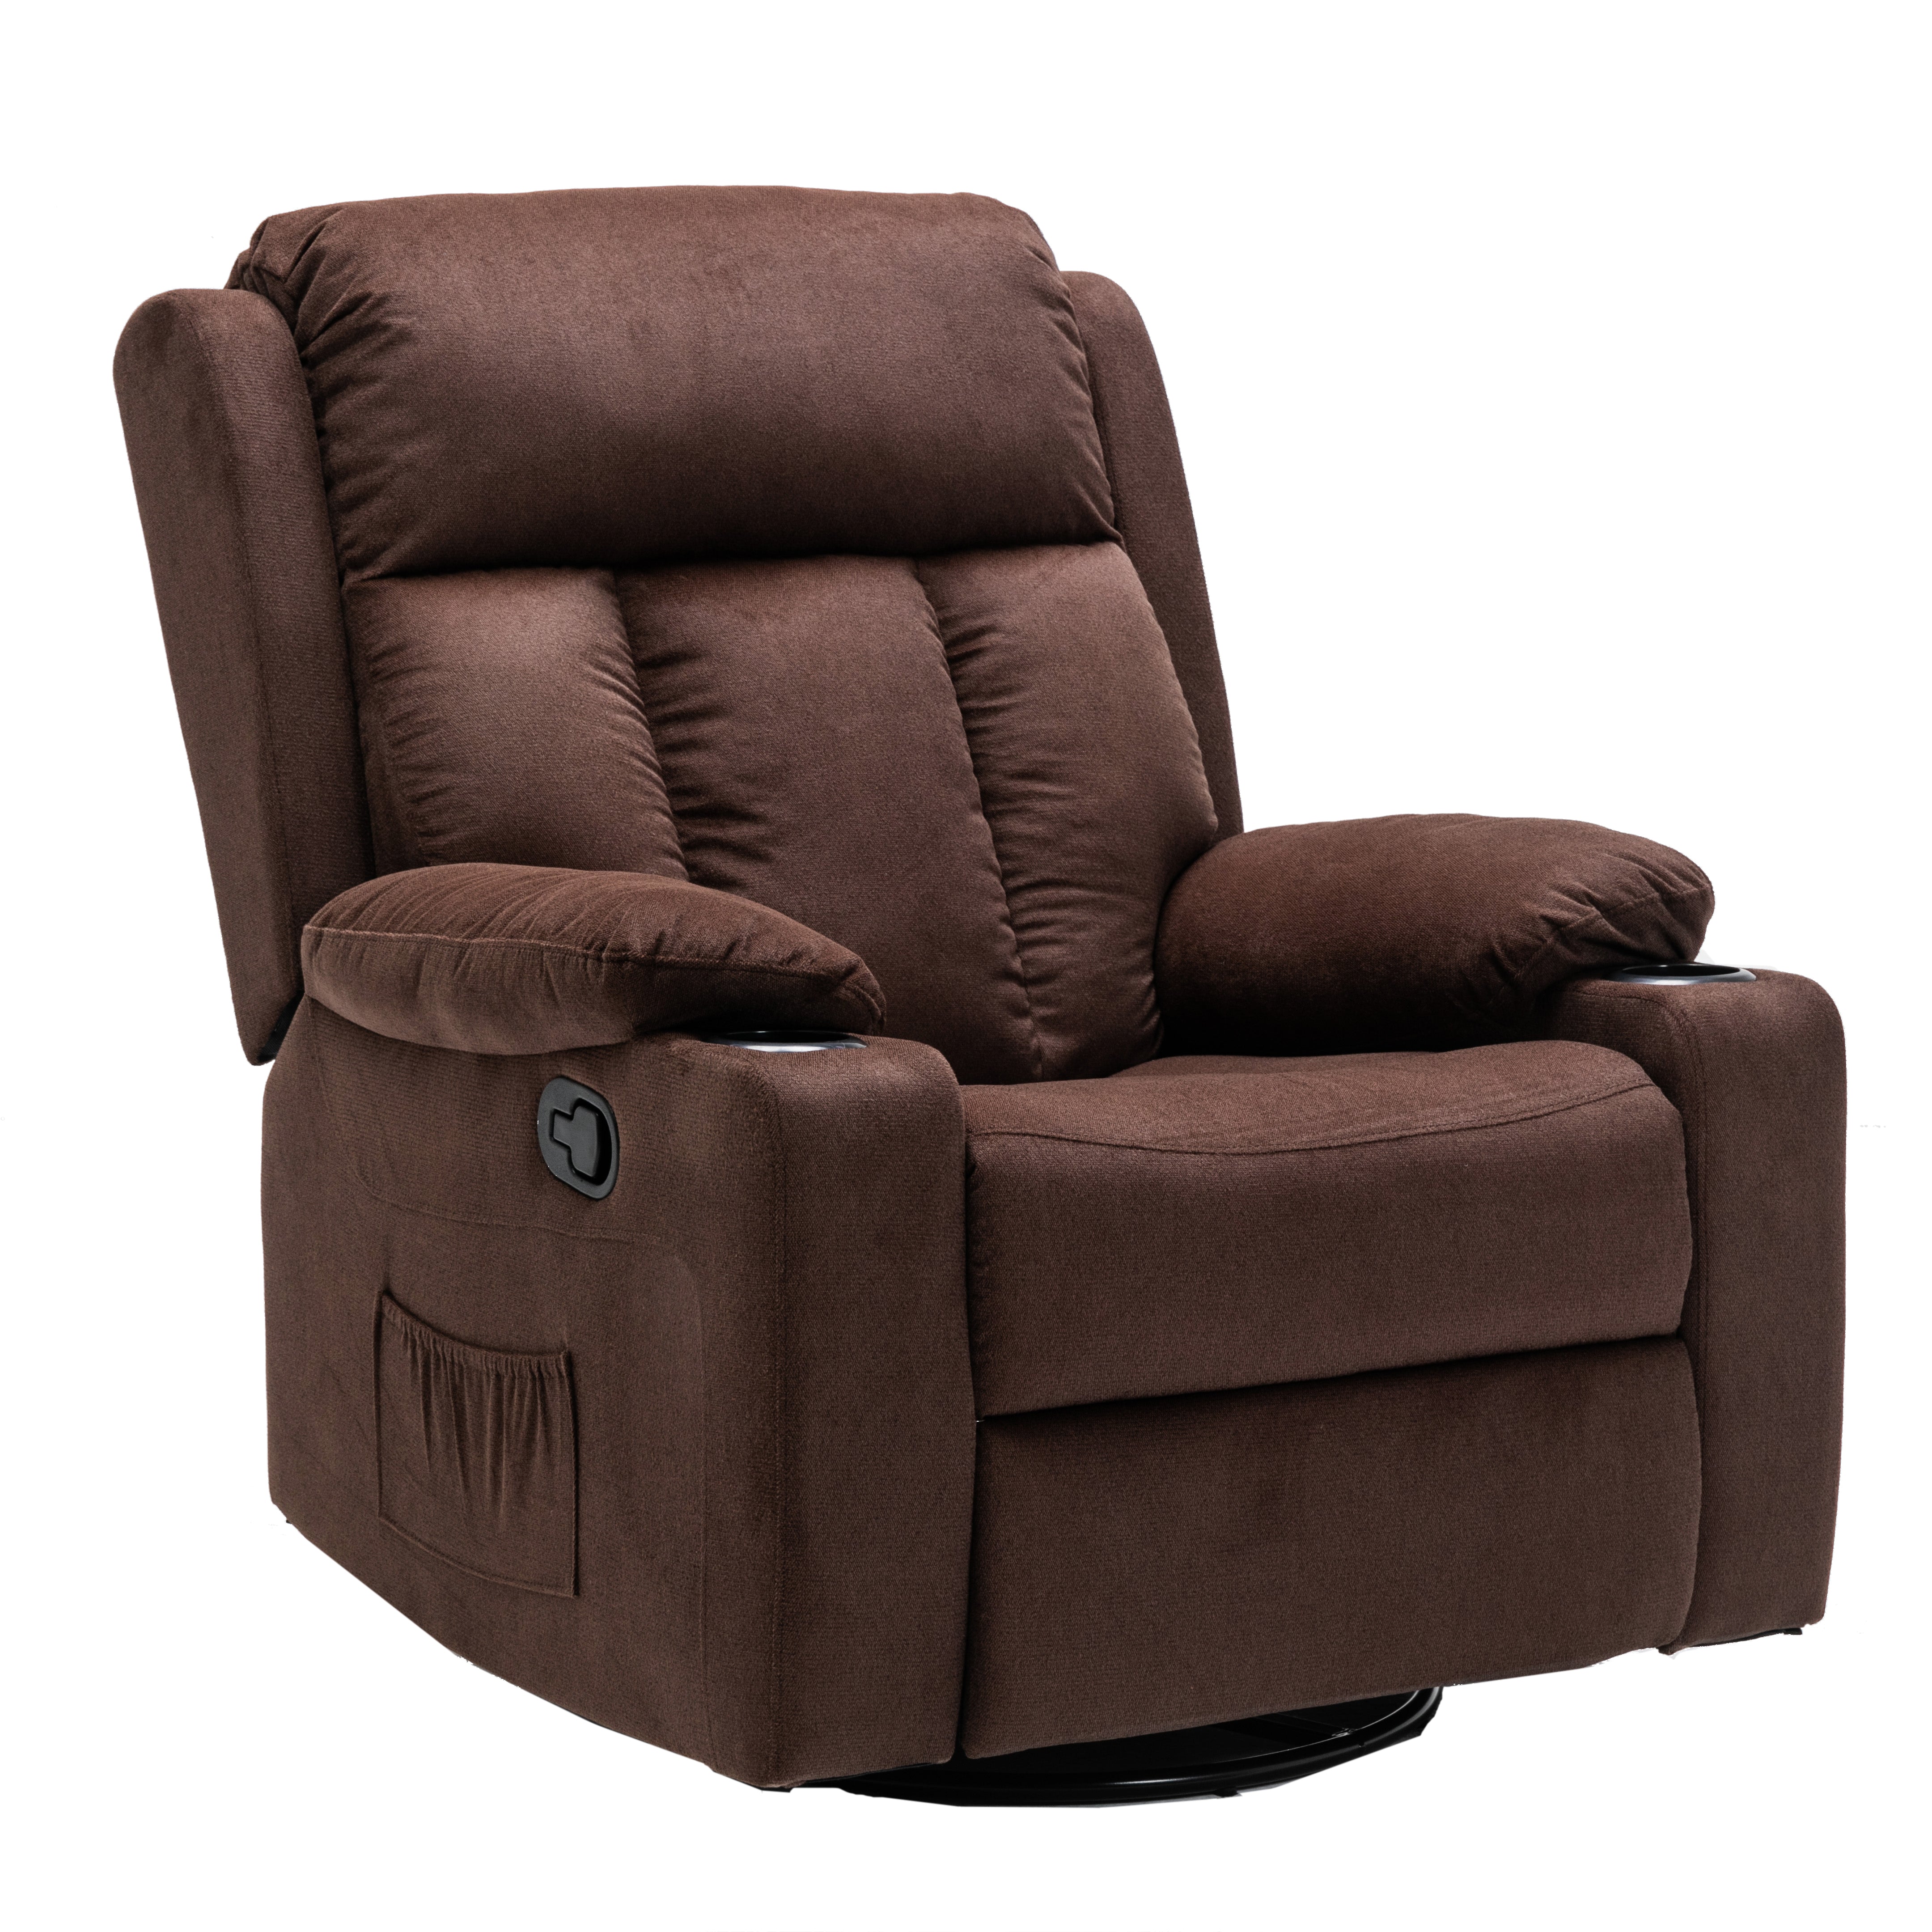 Lexi Recliner Armchair in Grey, Model CR-2032, Comfortable Seating Furniture5